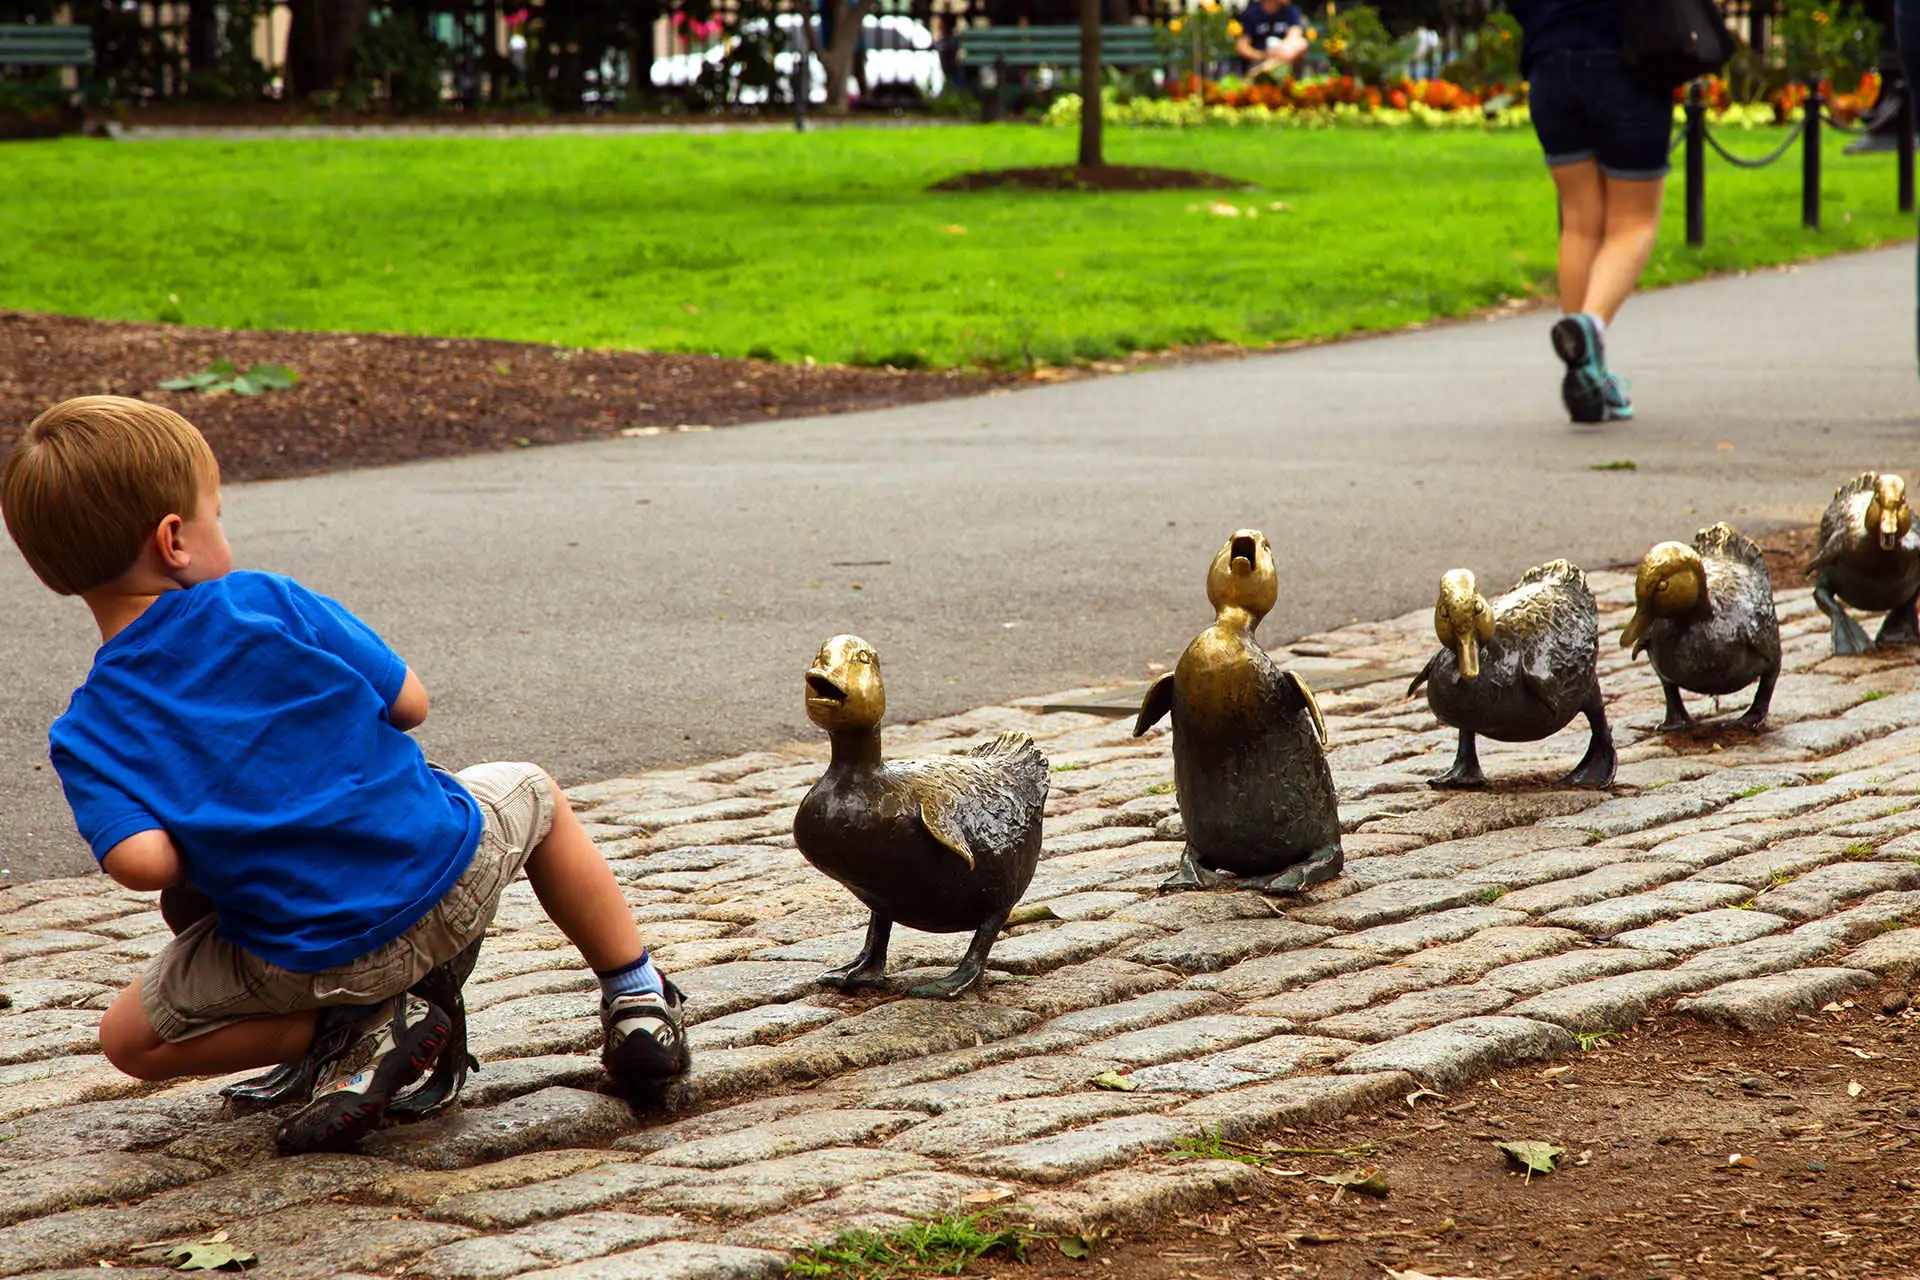 Little Boy Playing With Boston Ducks; Courtesy of Greater Boston Convention & Visitors Bureau